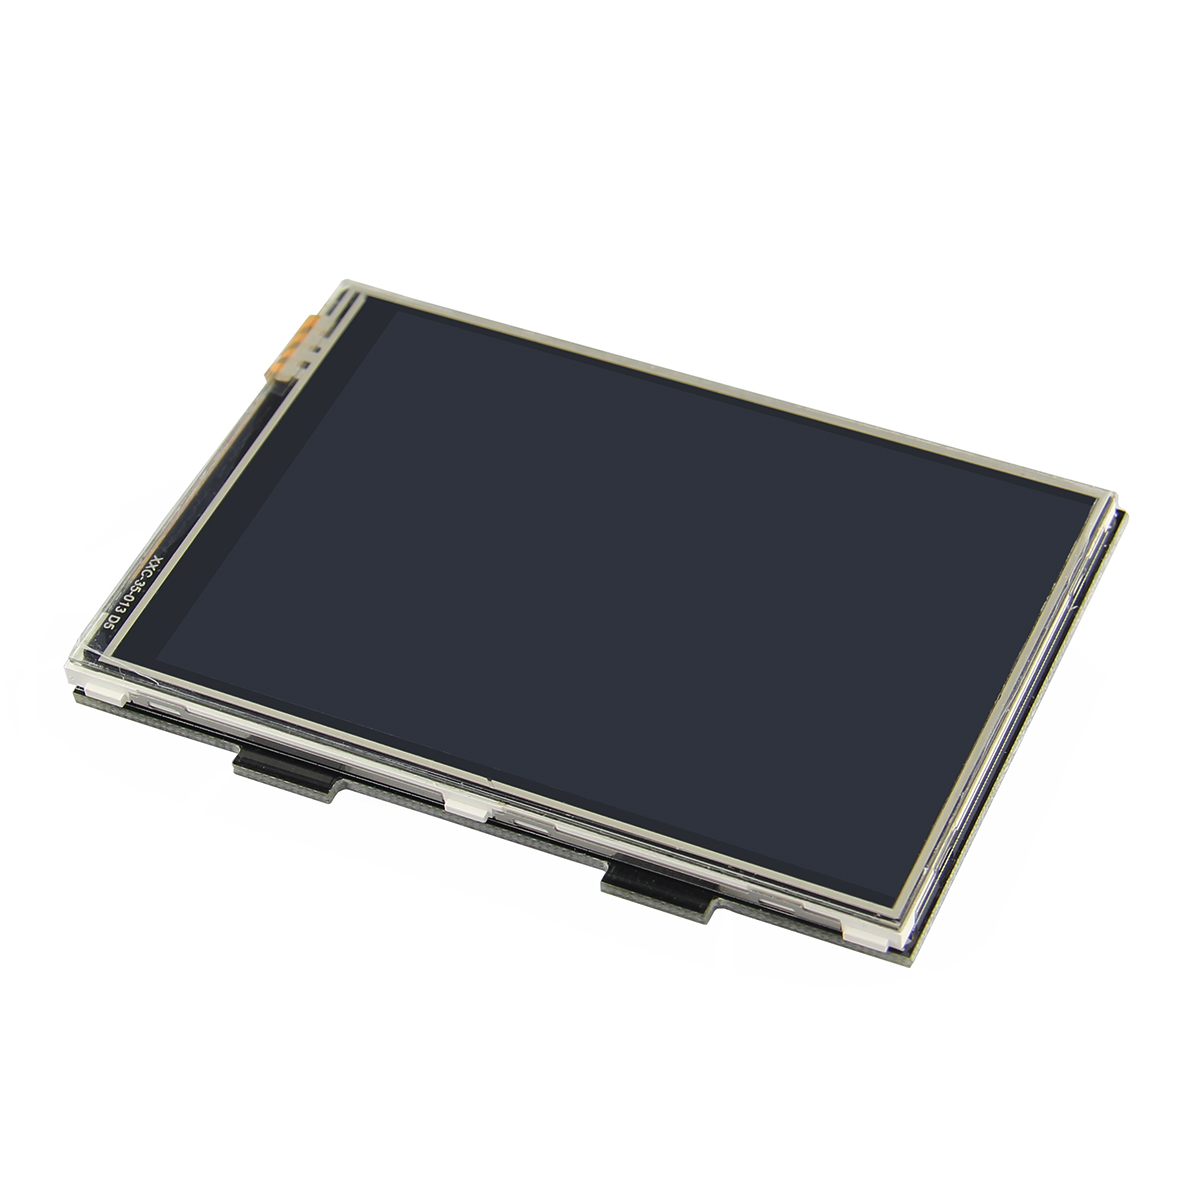 3.5 Inch 320 X 480 TFT LCD Display Touch Board For Raspberry Pi 2/B+ 7